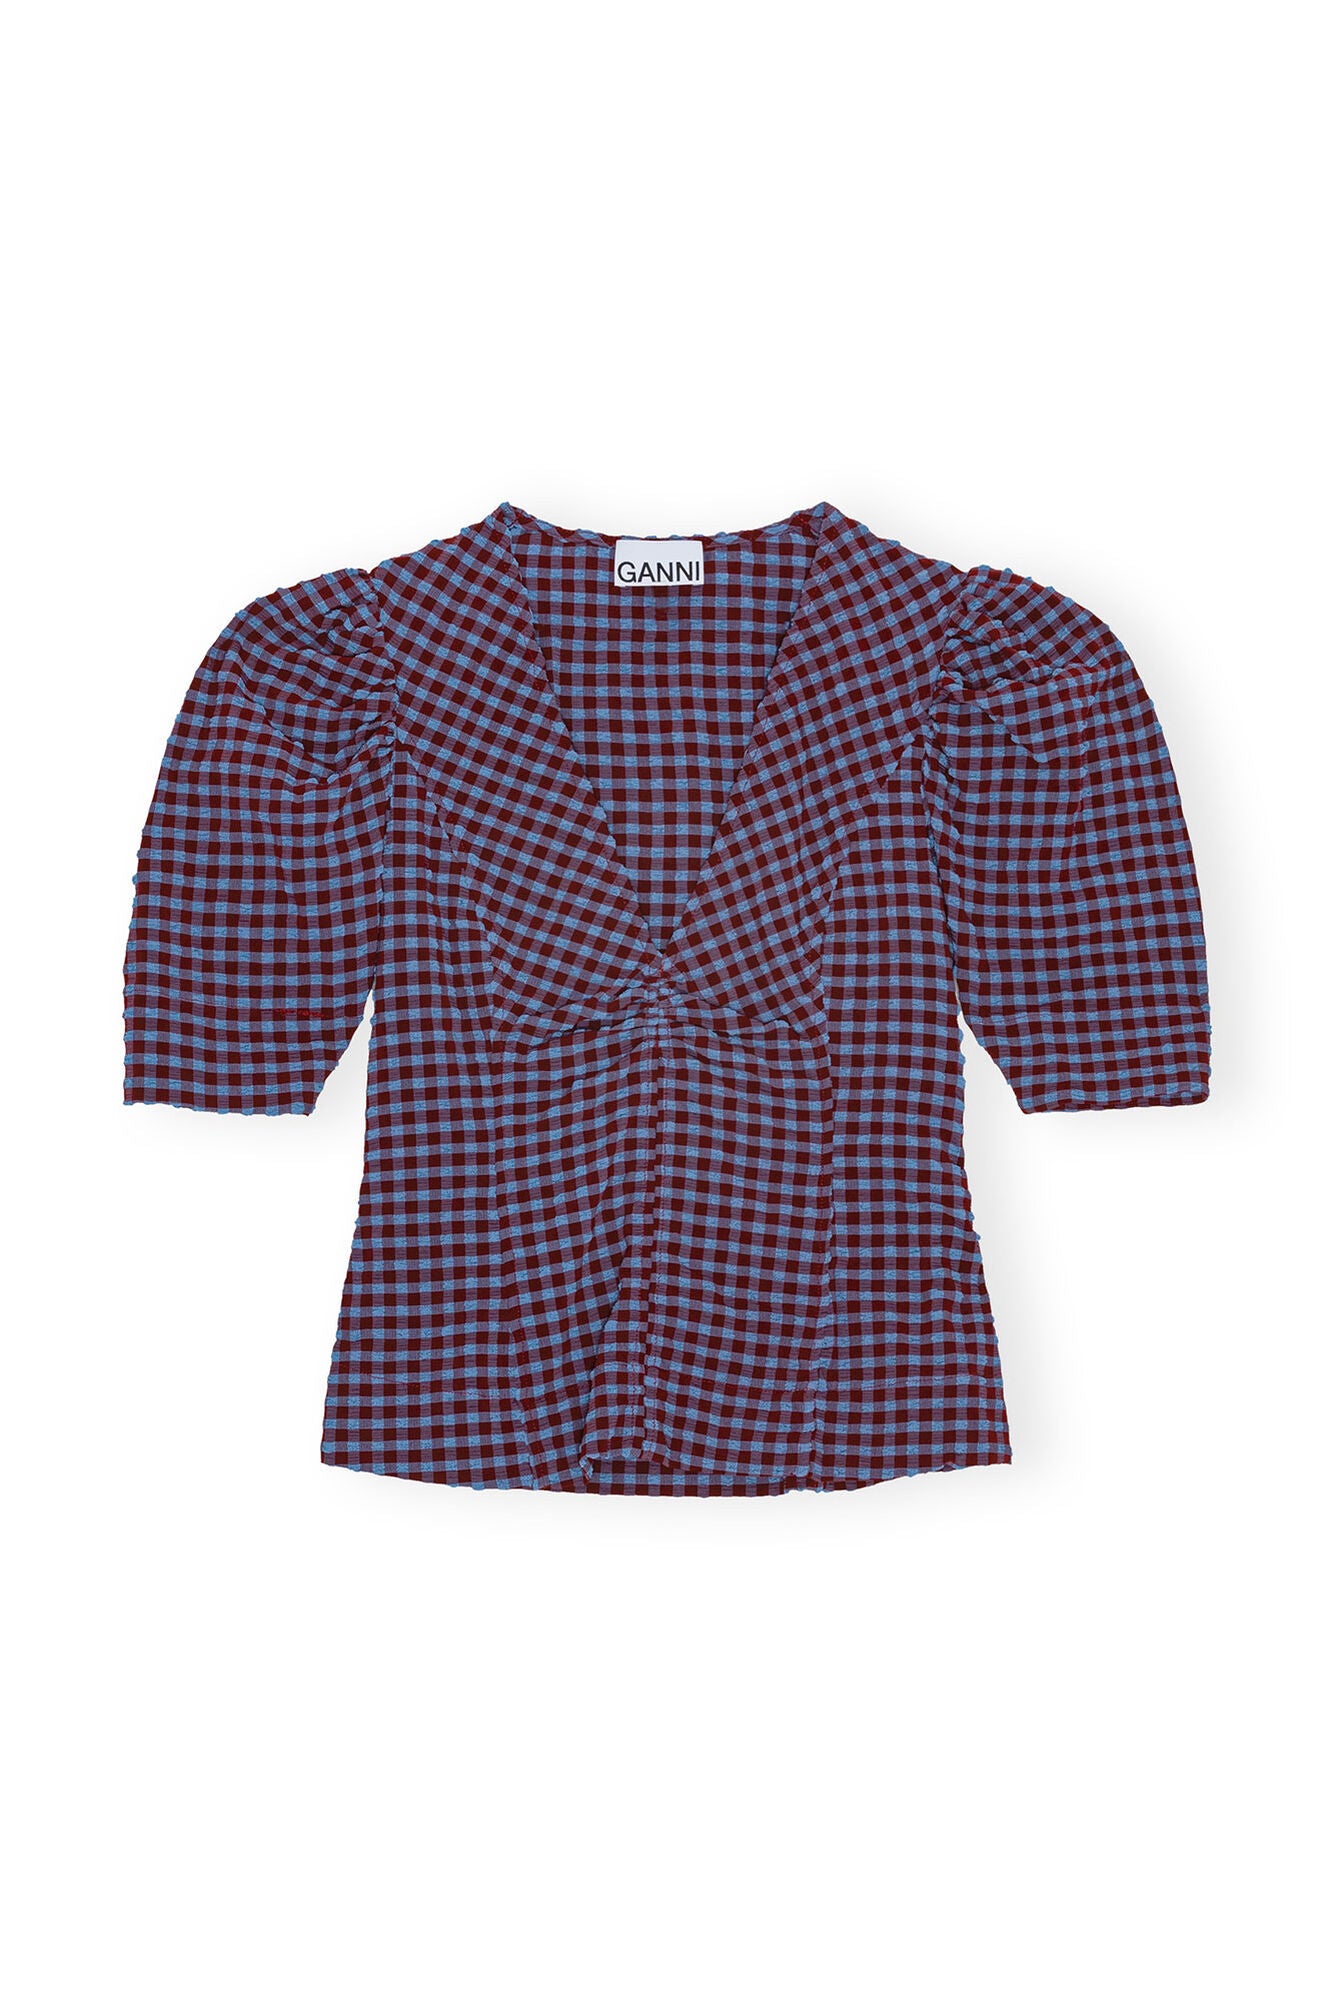 CHECKERED SEERSUCKER V-NECK BLOUSE IN RACING RED - Romi Boutique